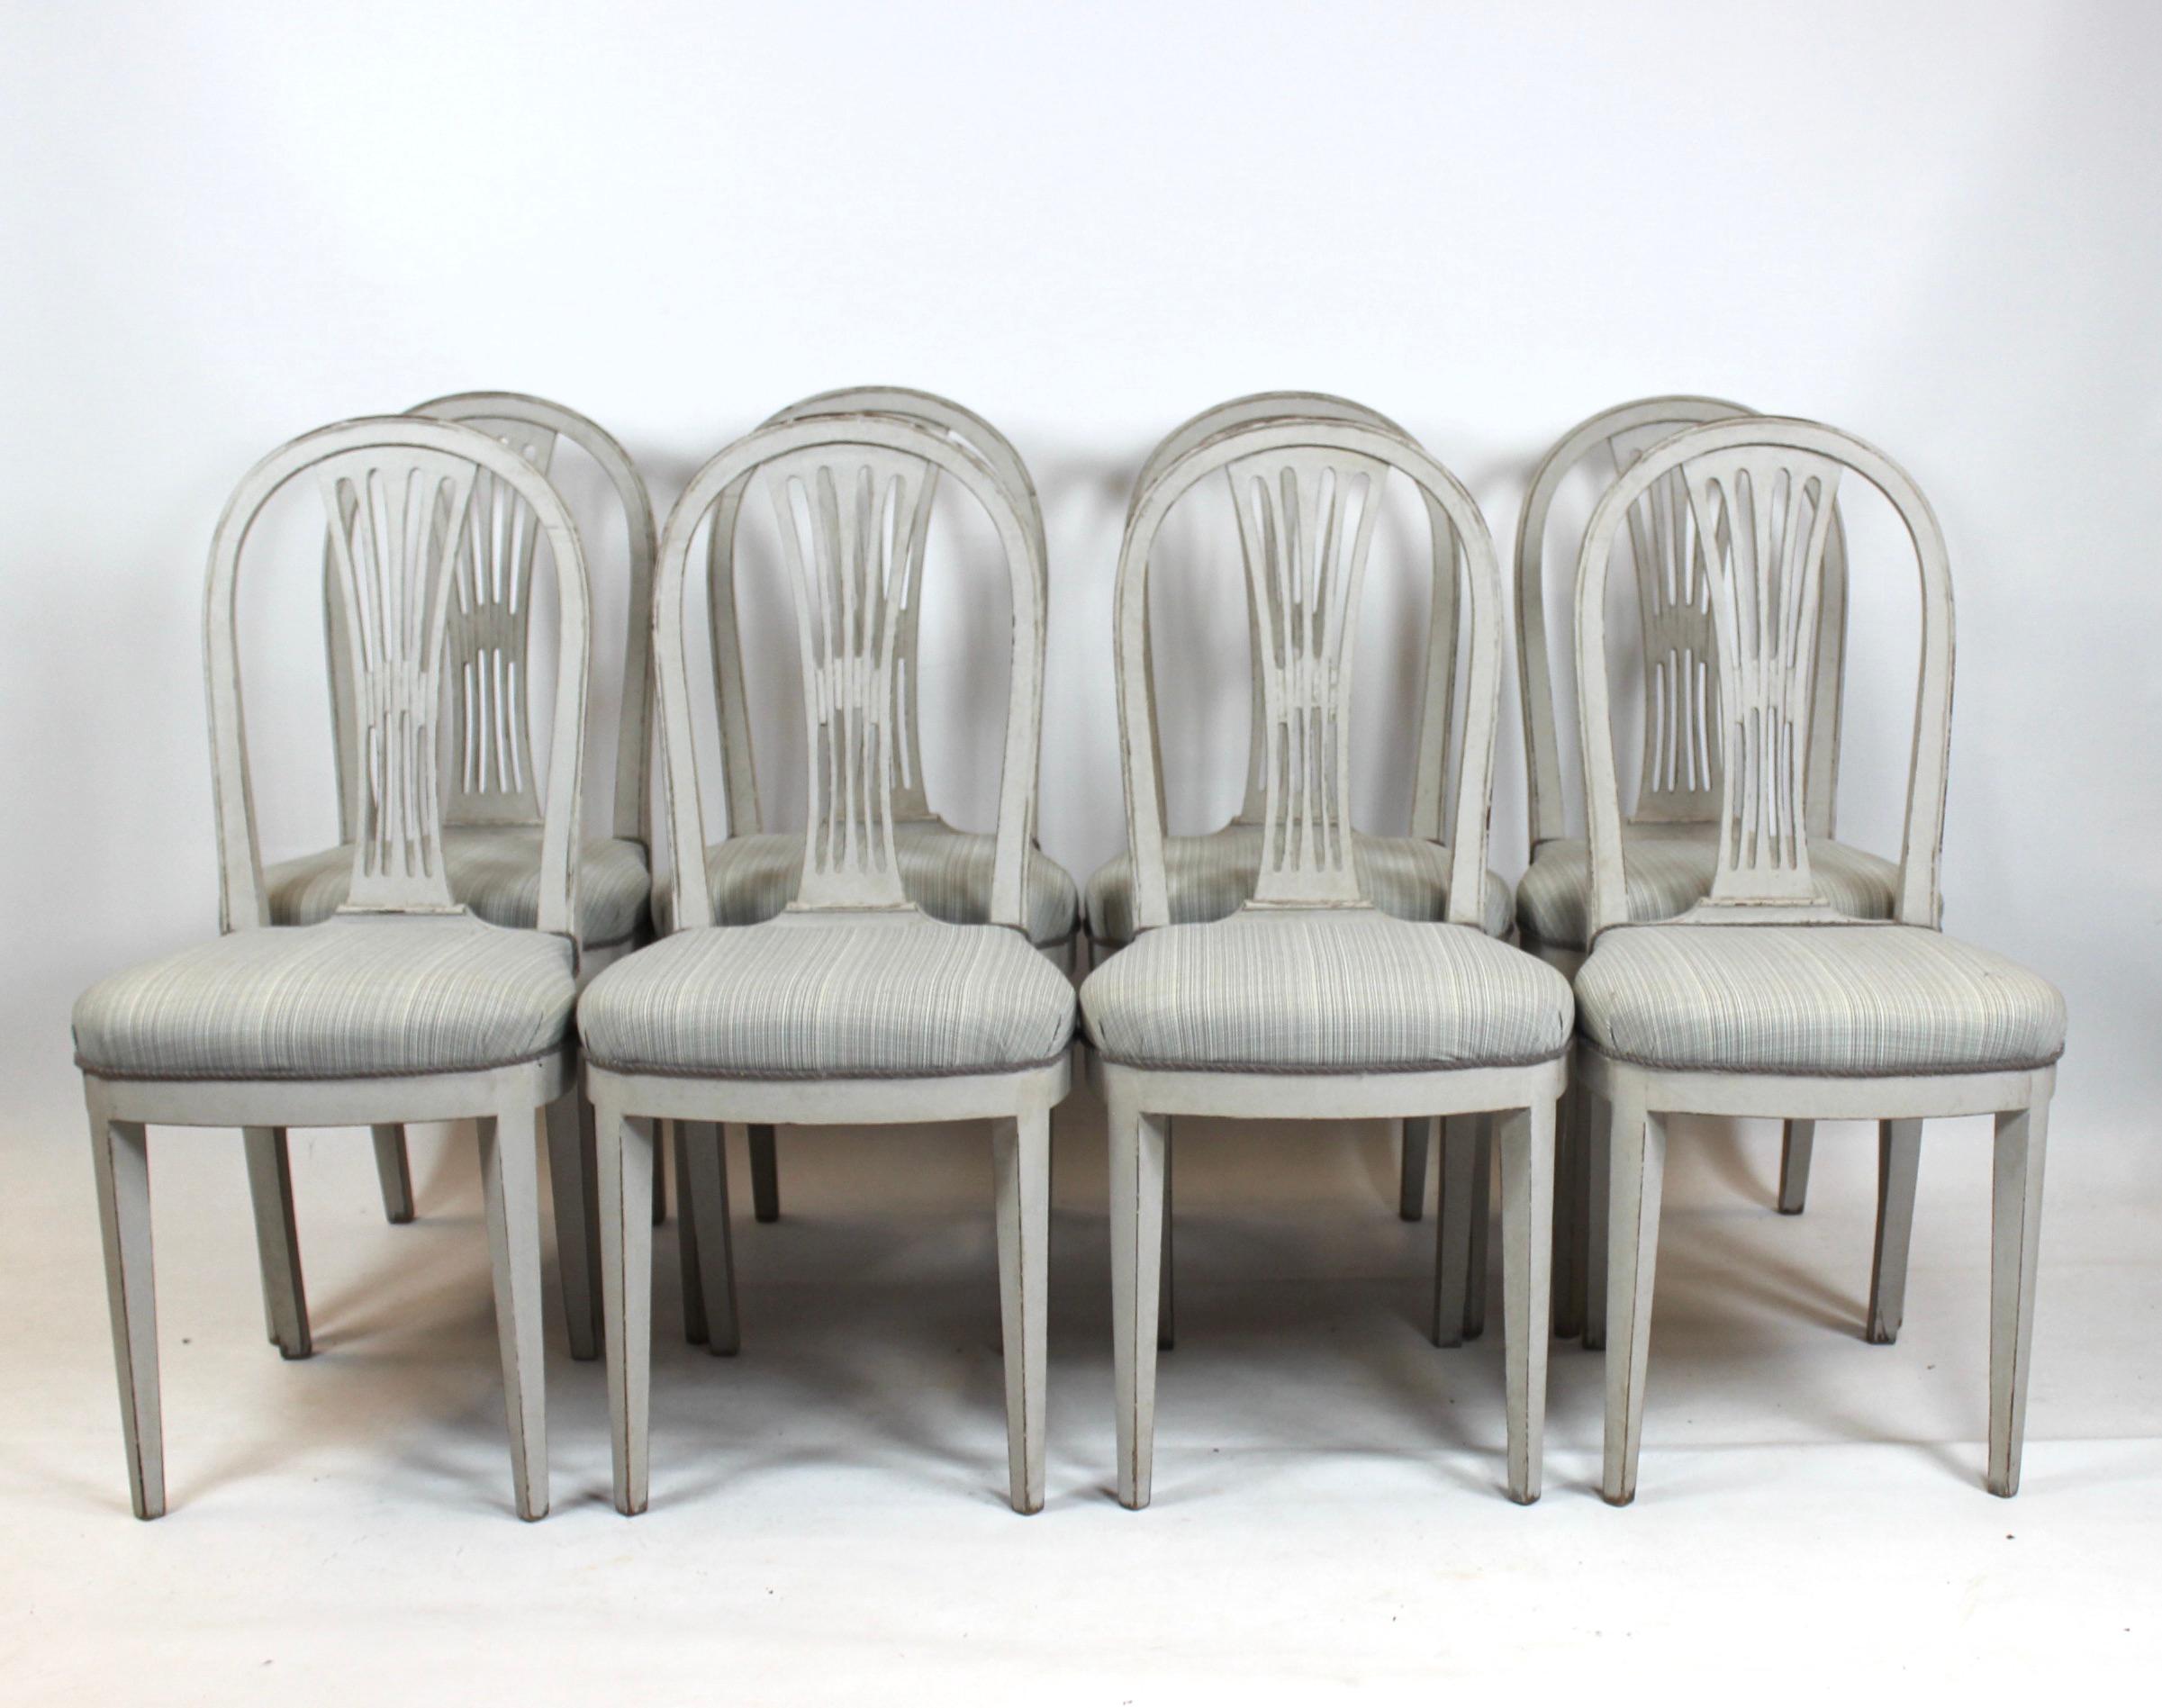 Grey painted Gustavian dining set consisting of large dining table with 4 extension plates and 8 dining chairs. All parts are in great antique condition. Each extension plate is 60cm. The chairs is 99cm in height, 45cm in width, 40cm in depth and